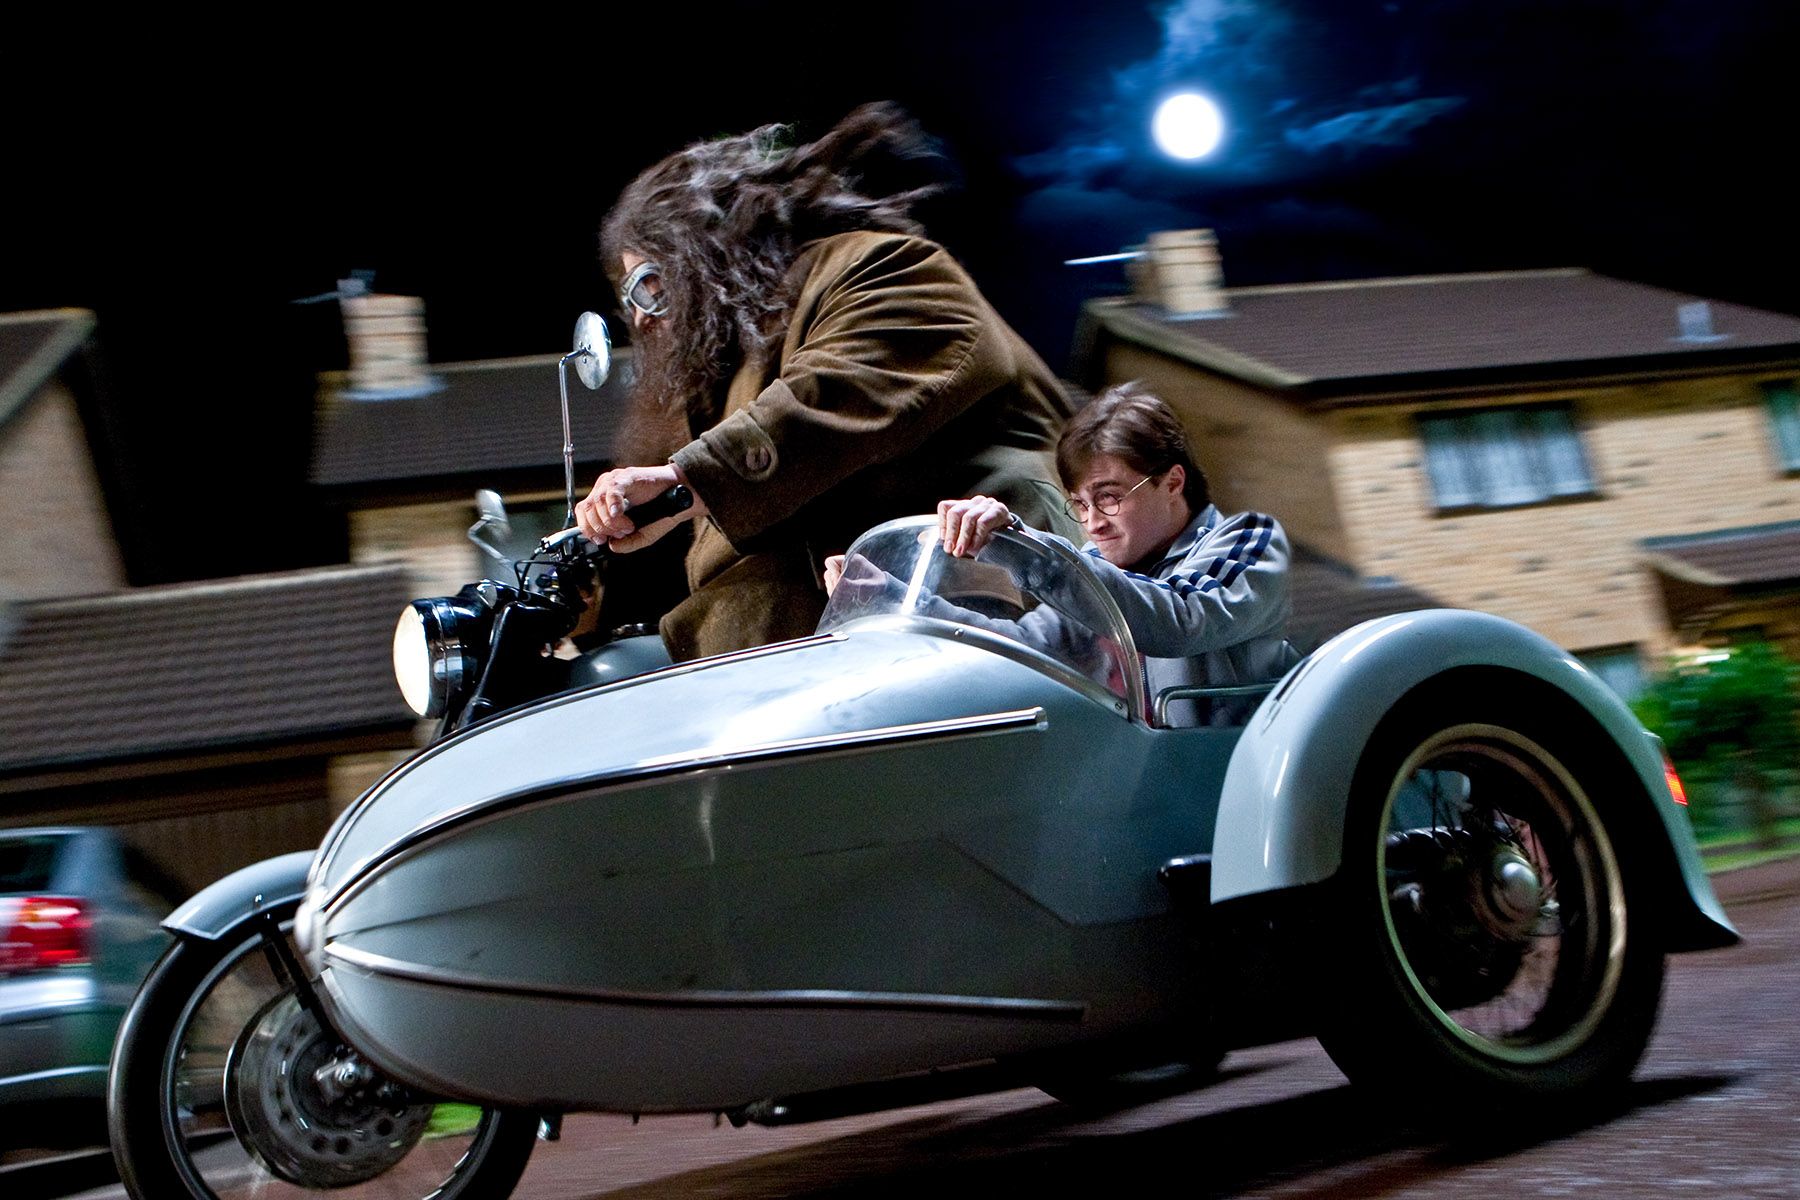 Robbie Coltrane and Daniel Radcliffe in Harry Potter and the Deathly Hallows